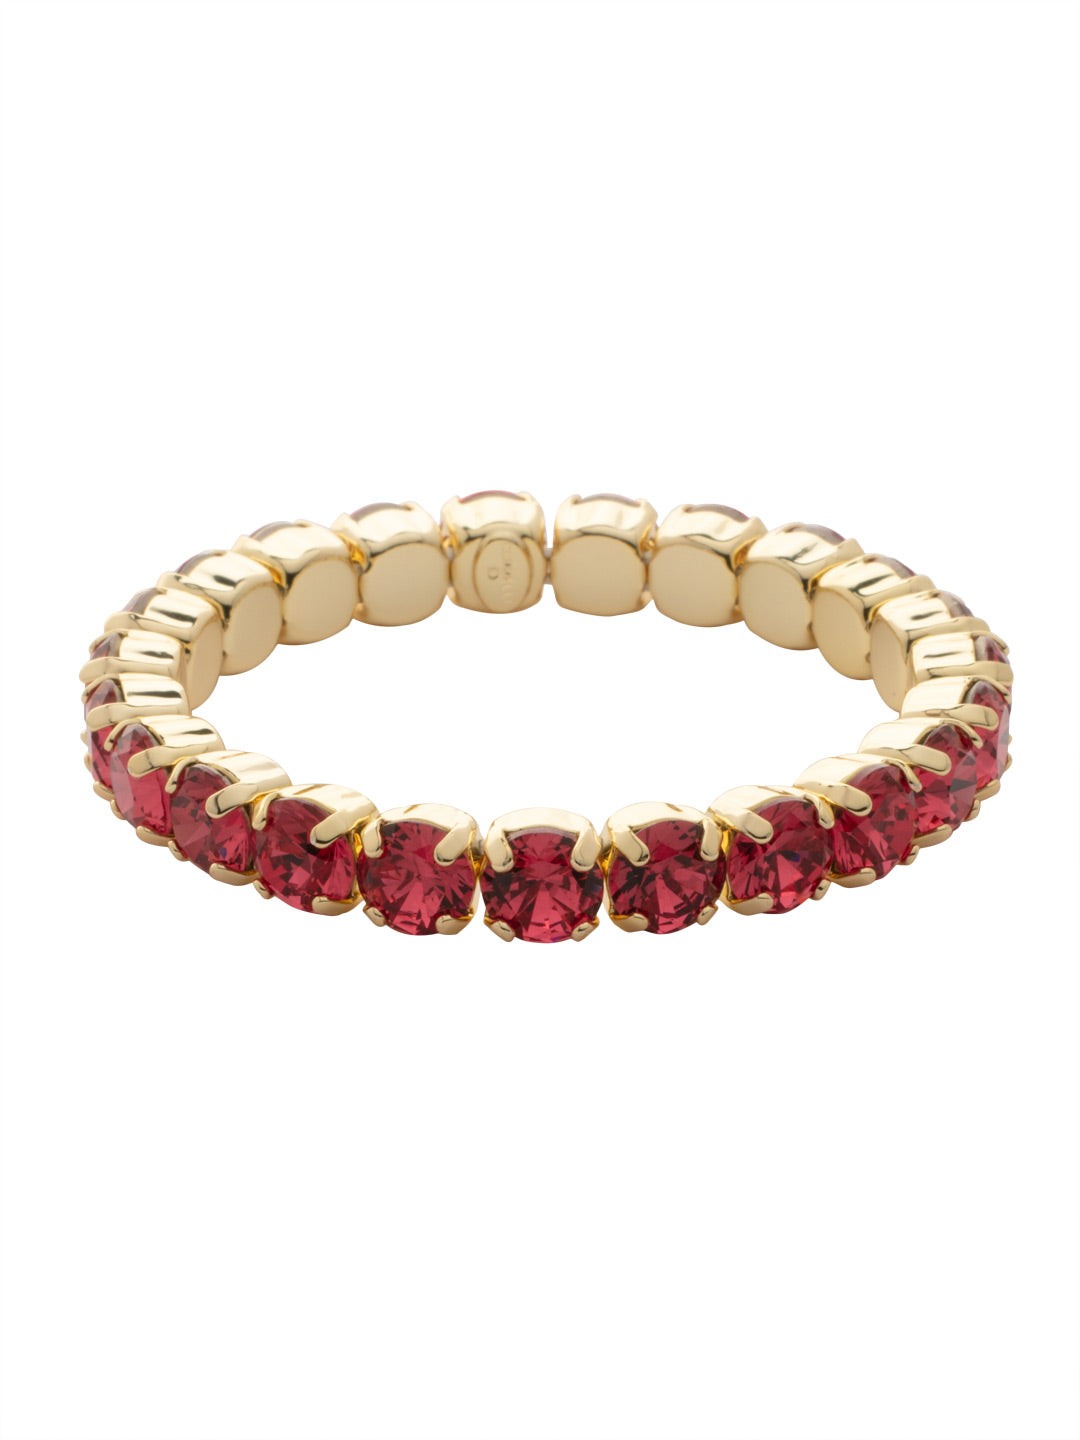 7 inch Sienna Stretch Bracelet - BFD50BGRO - <p>A modern take on a classic style, the Sienna Stretch Bracelet features a line of crystals on a sturdy jewelers' filament, stretching to fit most wrists comfortably, without the hassle of a clasp! (7 inches in diameter, fits average wrist sizes) From Sorrelli's Rose collection in our Bright Gold-tone finish.</p>